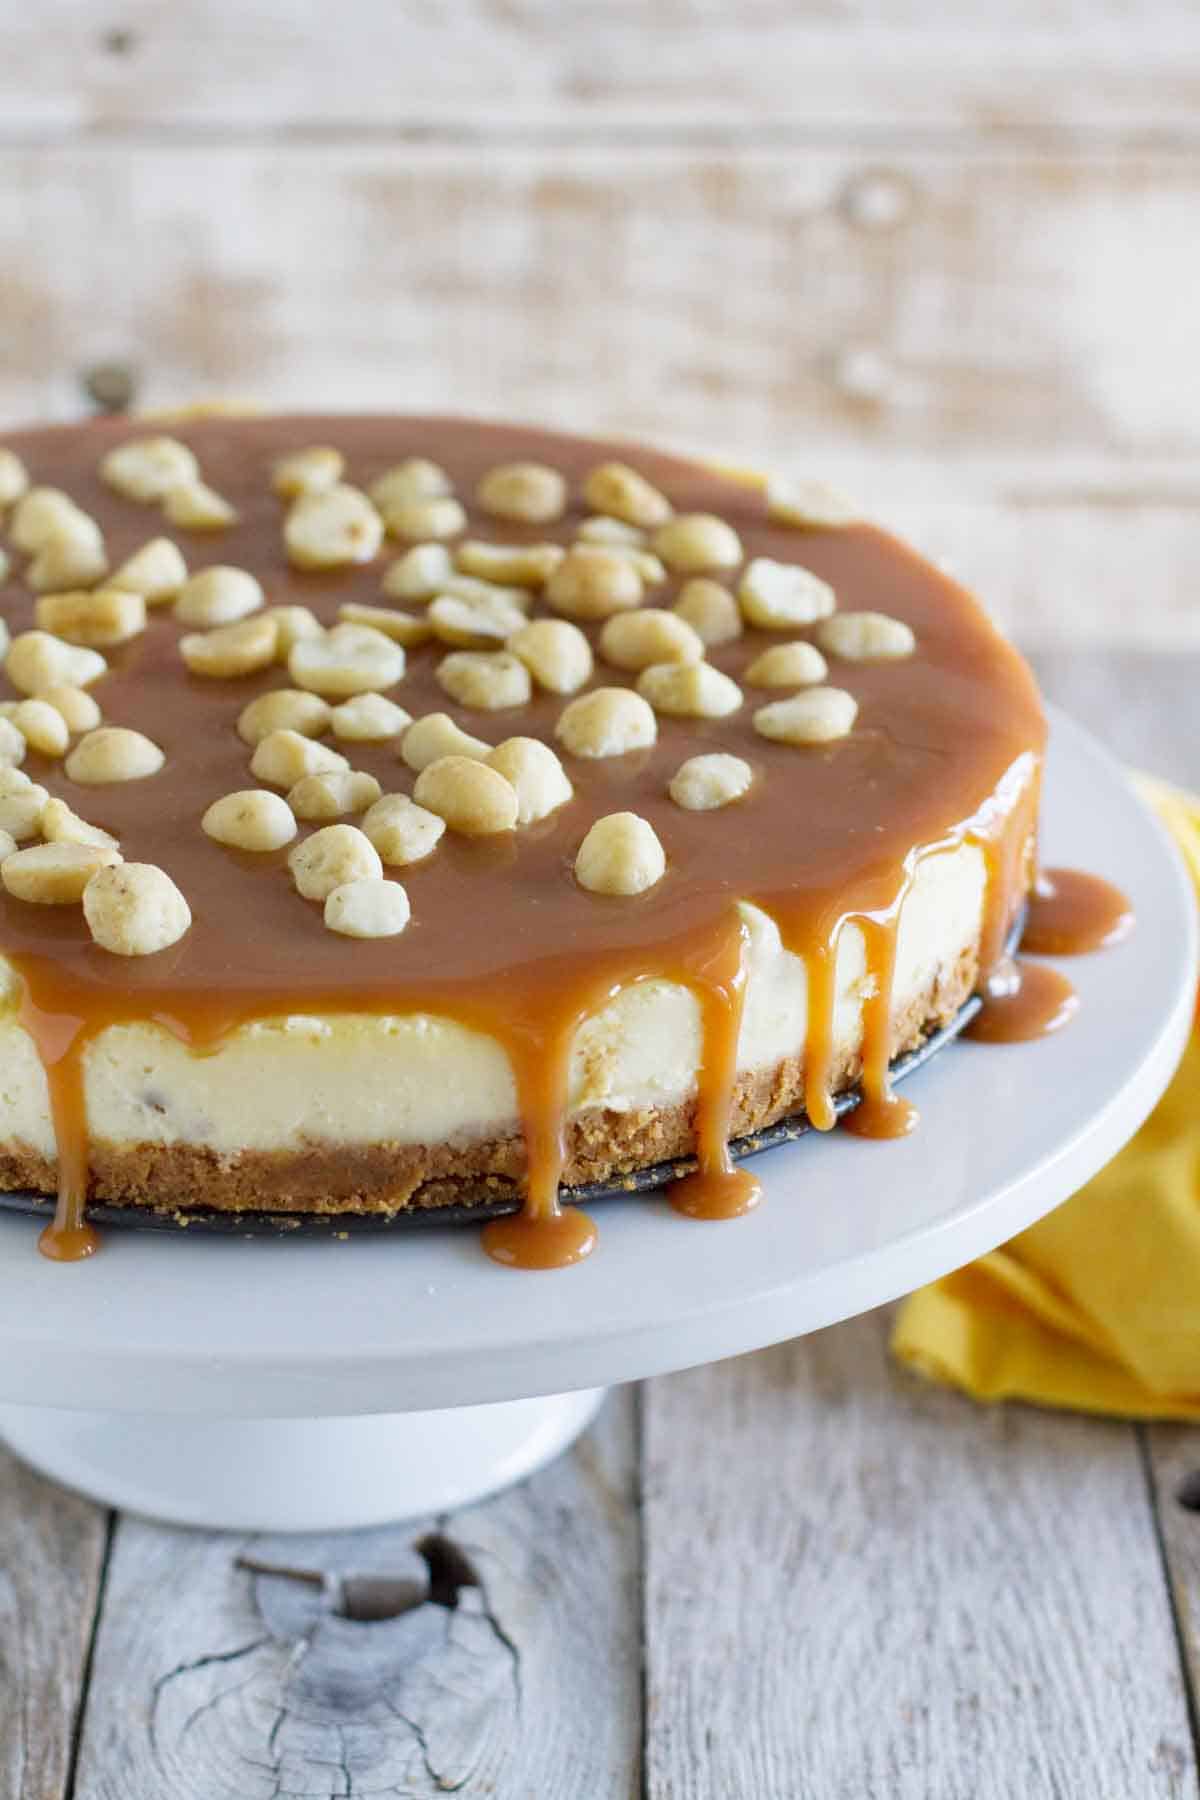 full white chocolate cheesecake with macadamia nuts and caramel